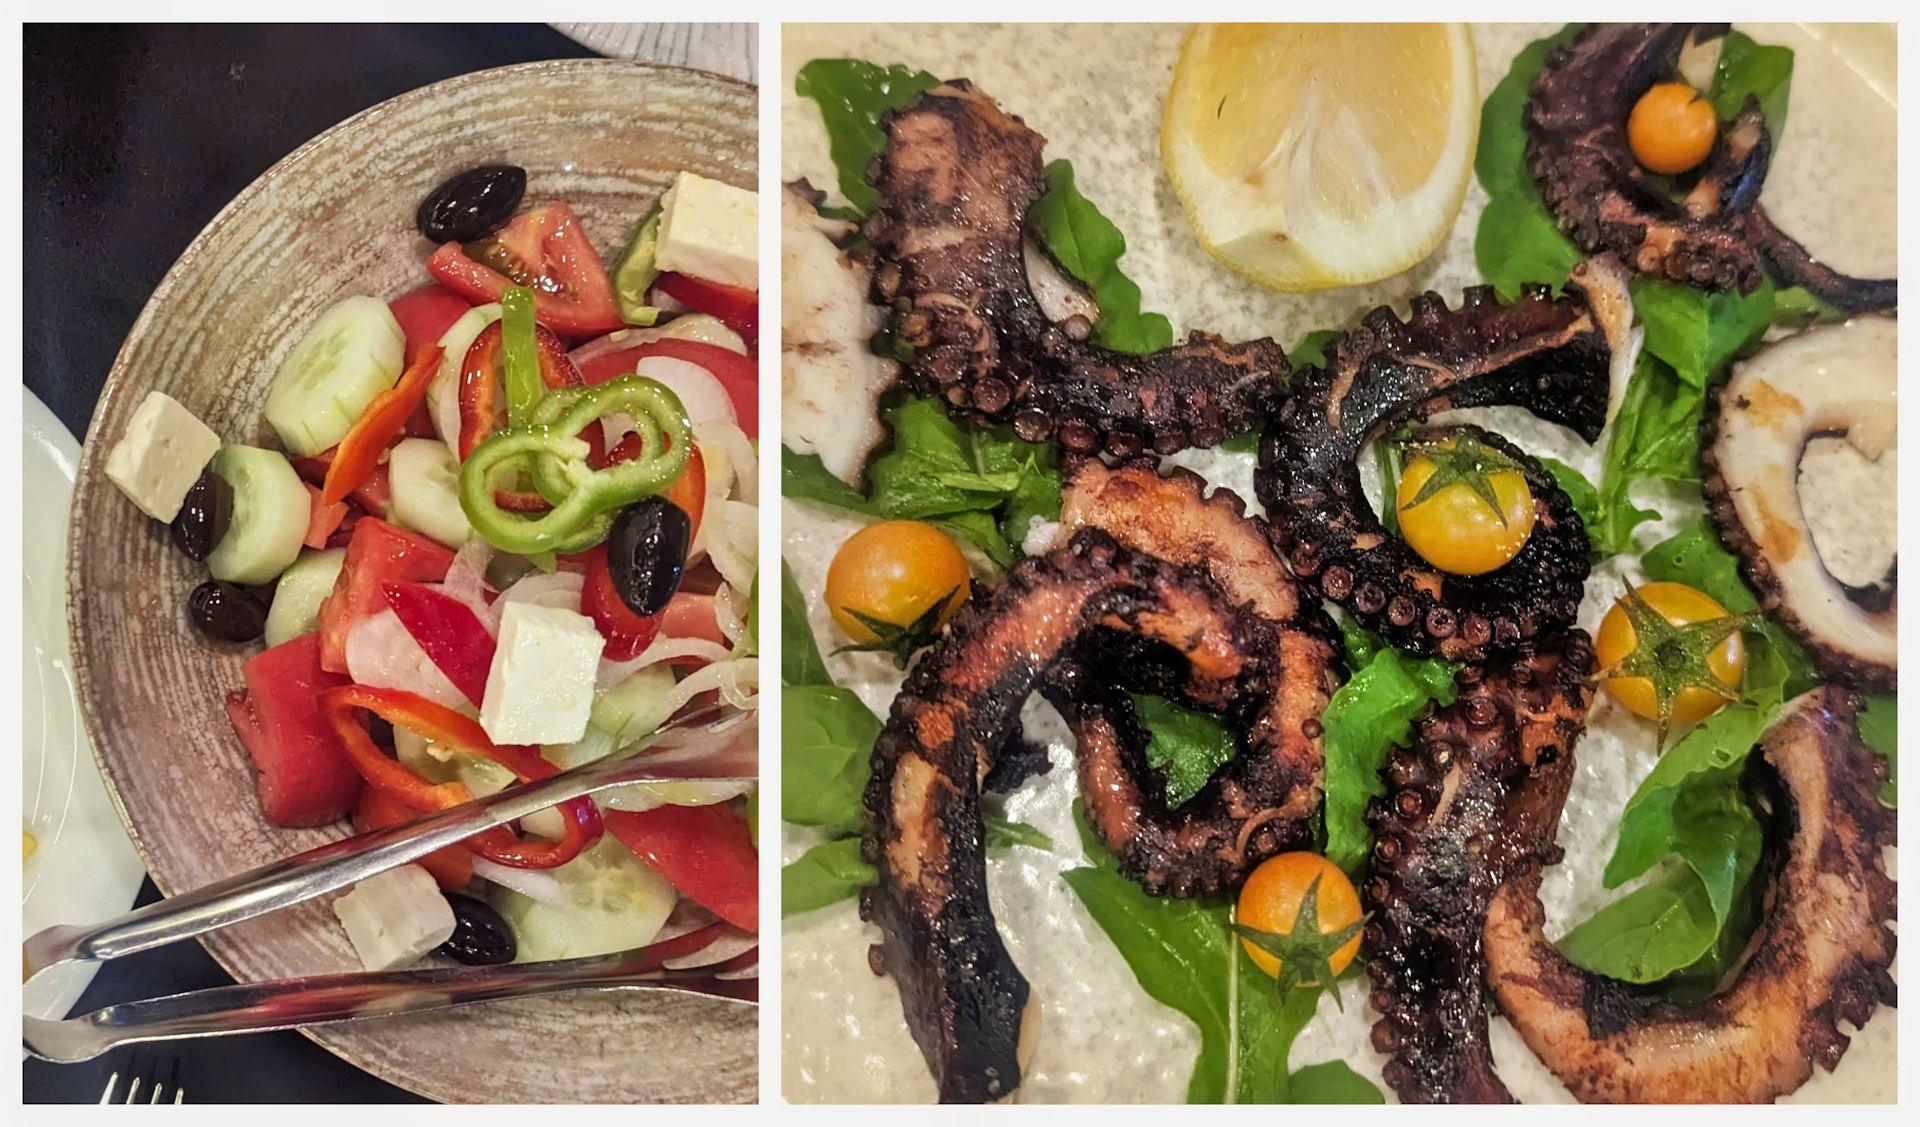 Mediterranean-style dinner featuring grilled octopus and a Greek salad